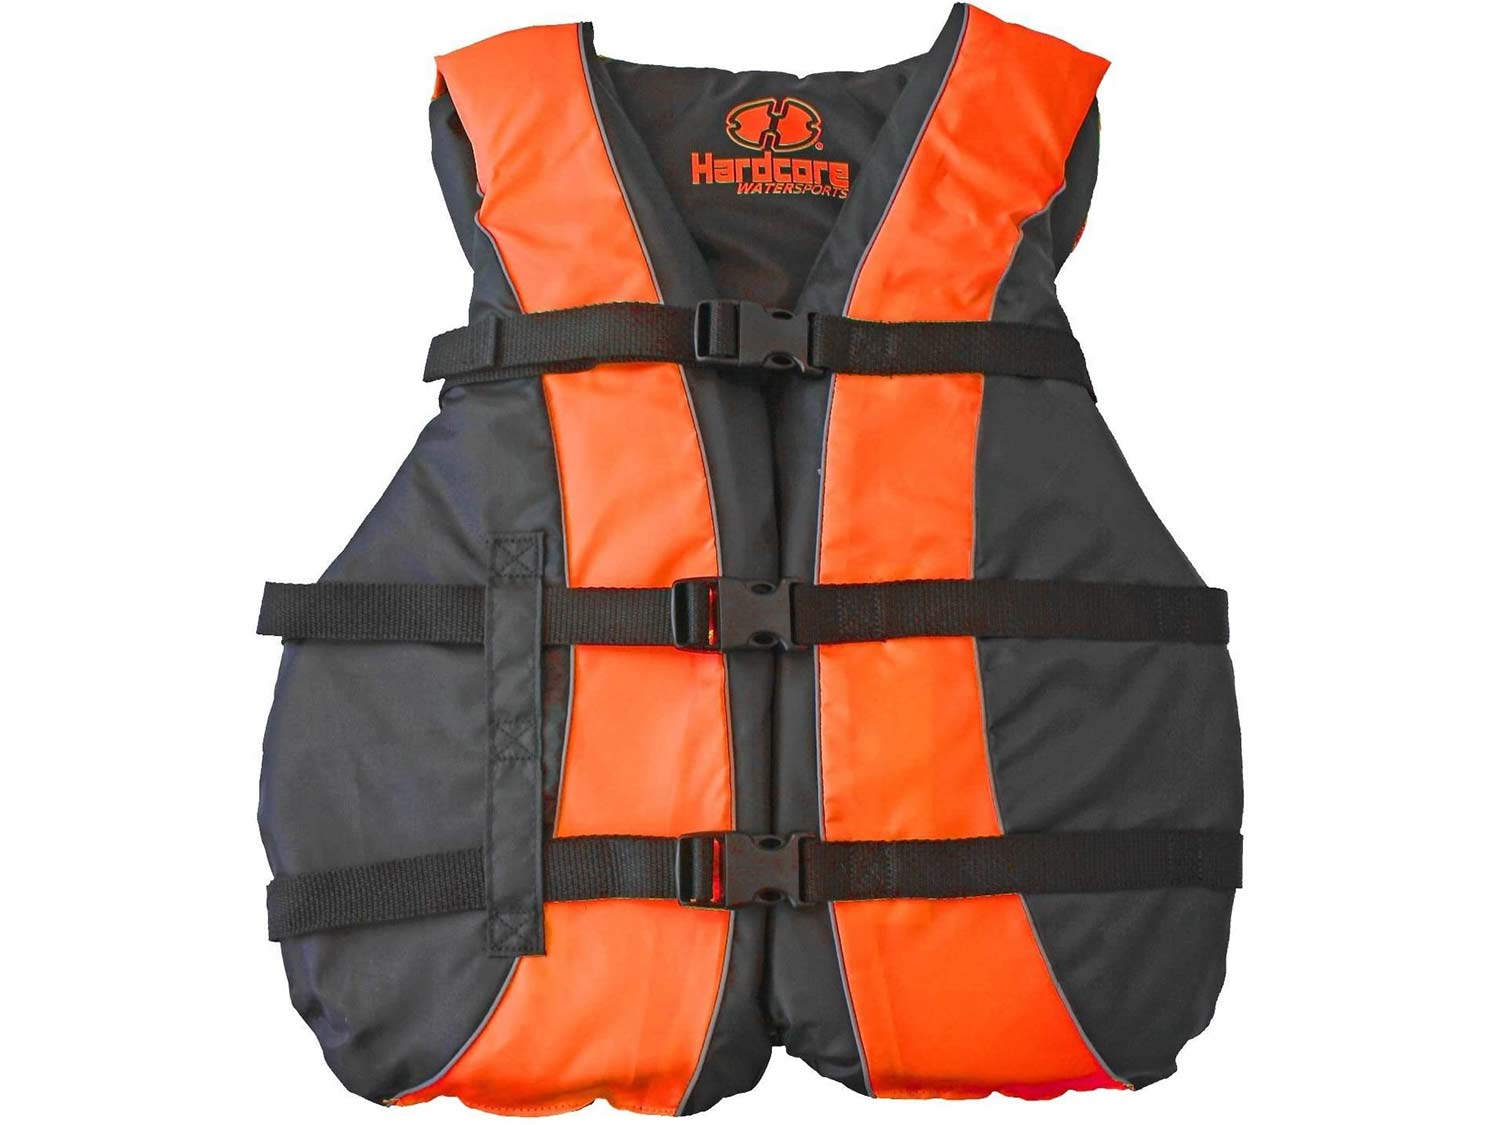 Best Fishing Life Vest: Life Jackets for Every Type